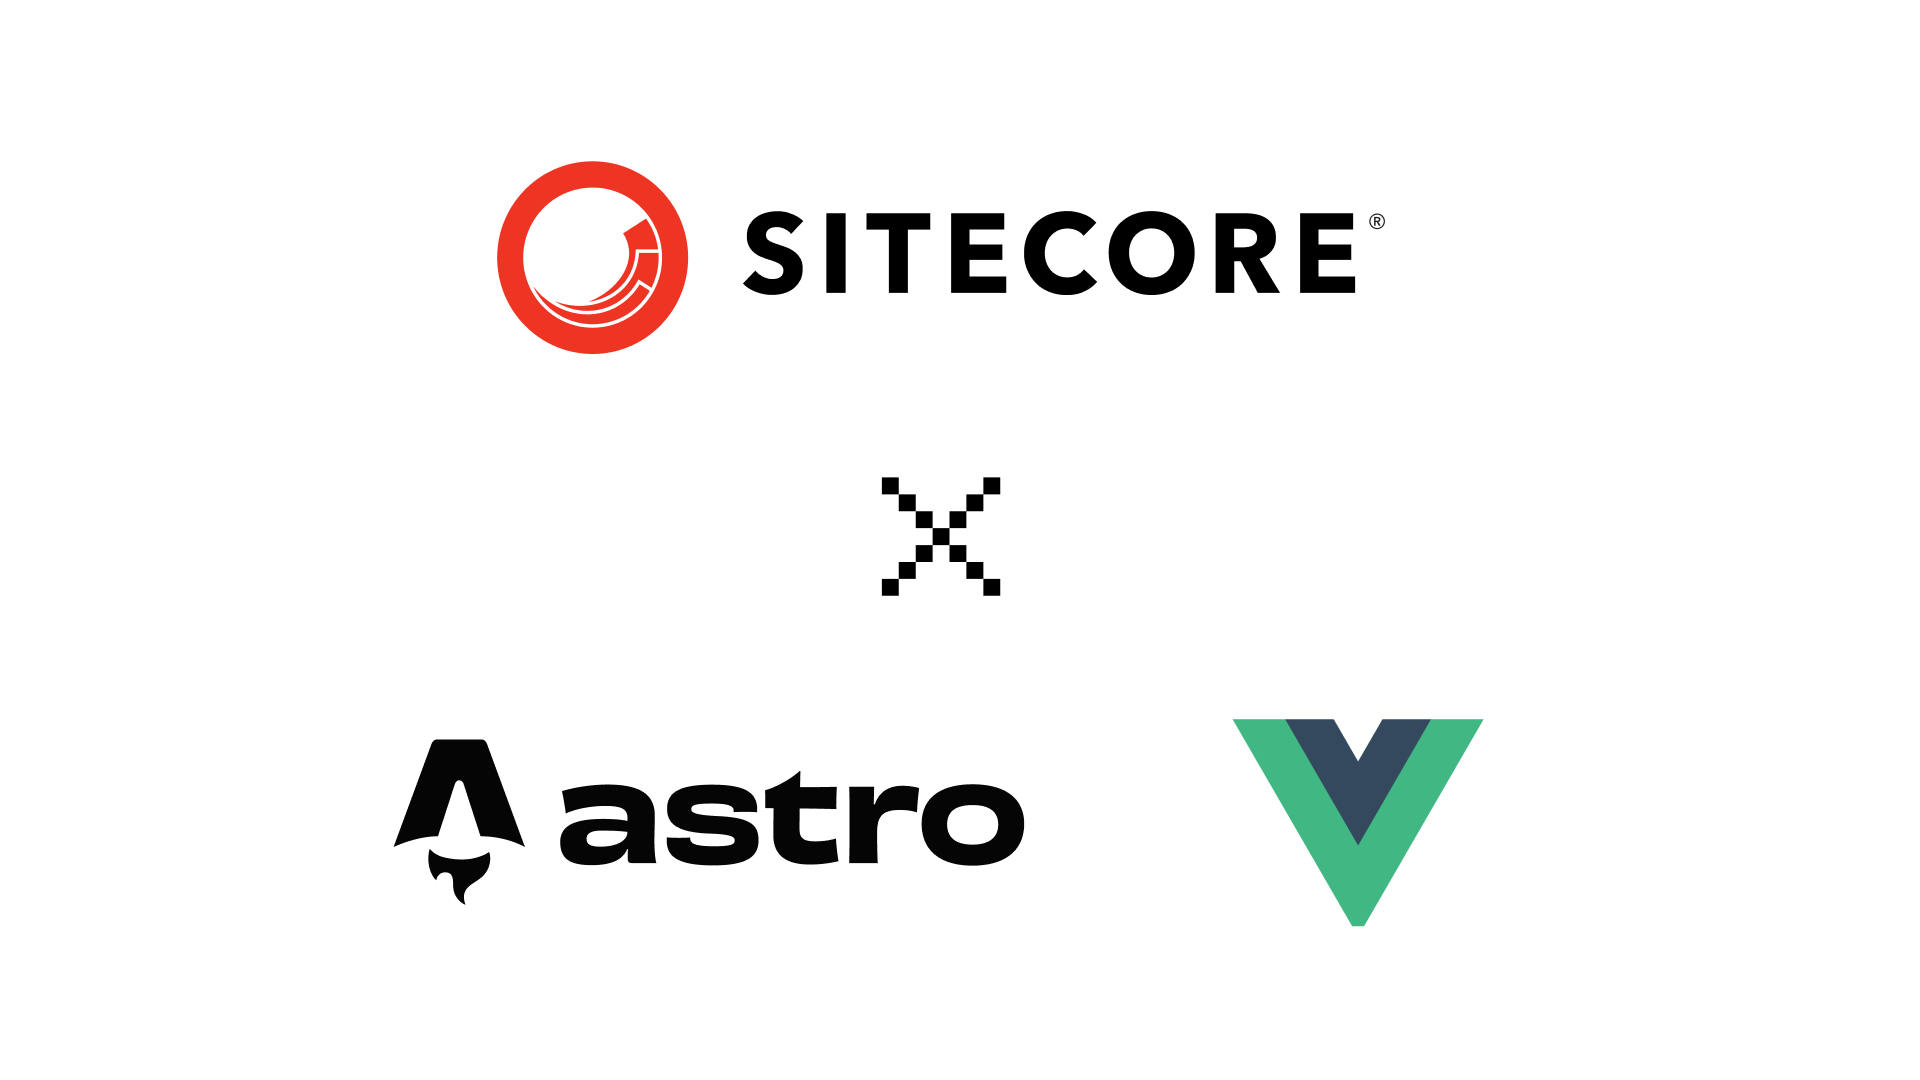 Cover Image for Interactive Vue Islands with Sitecore and Astro